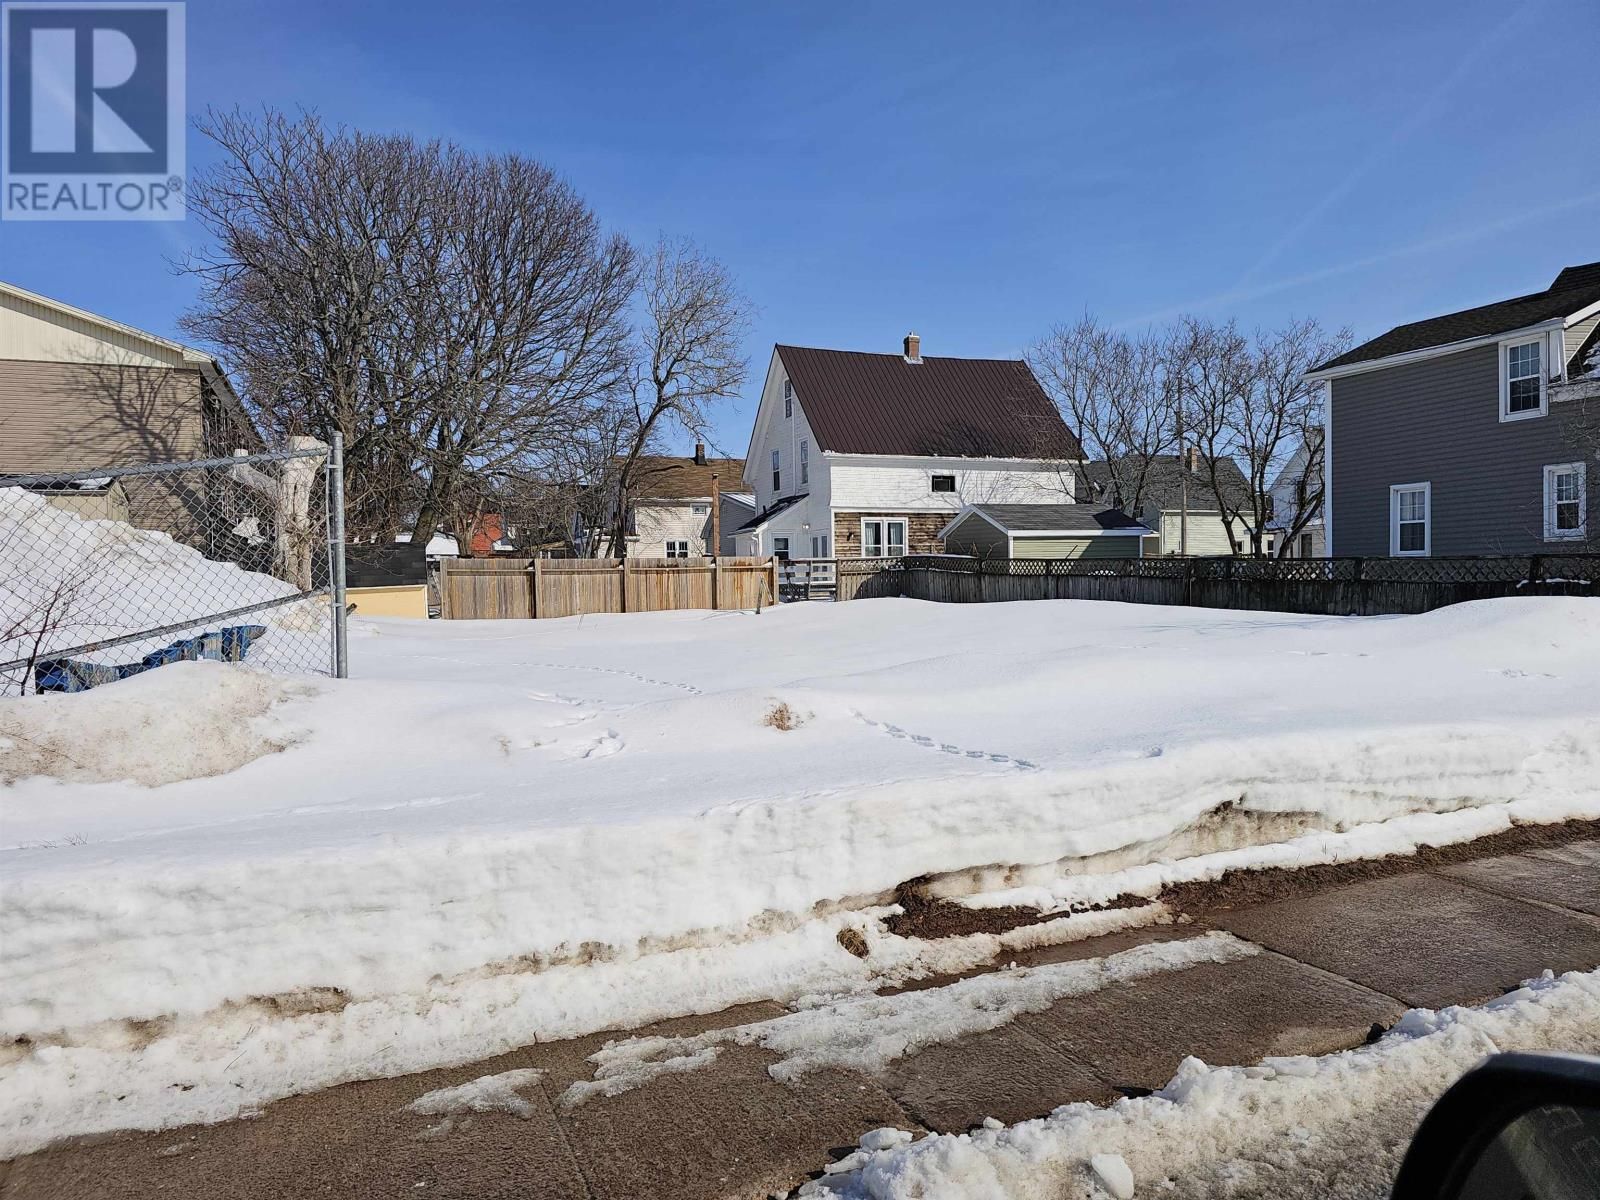 New property listed in Charlottetown